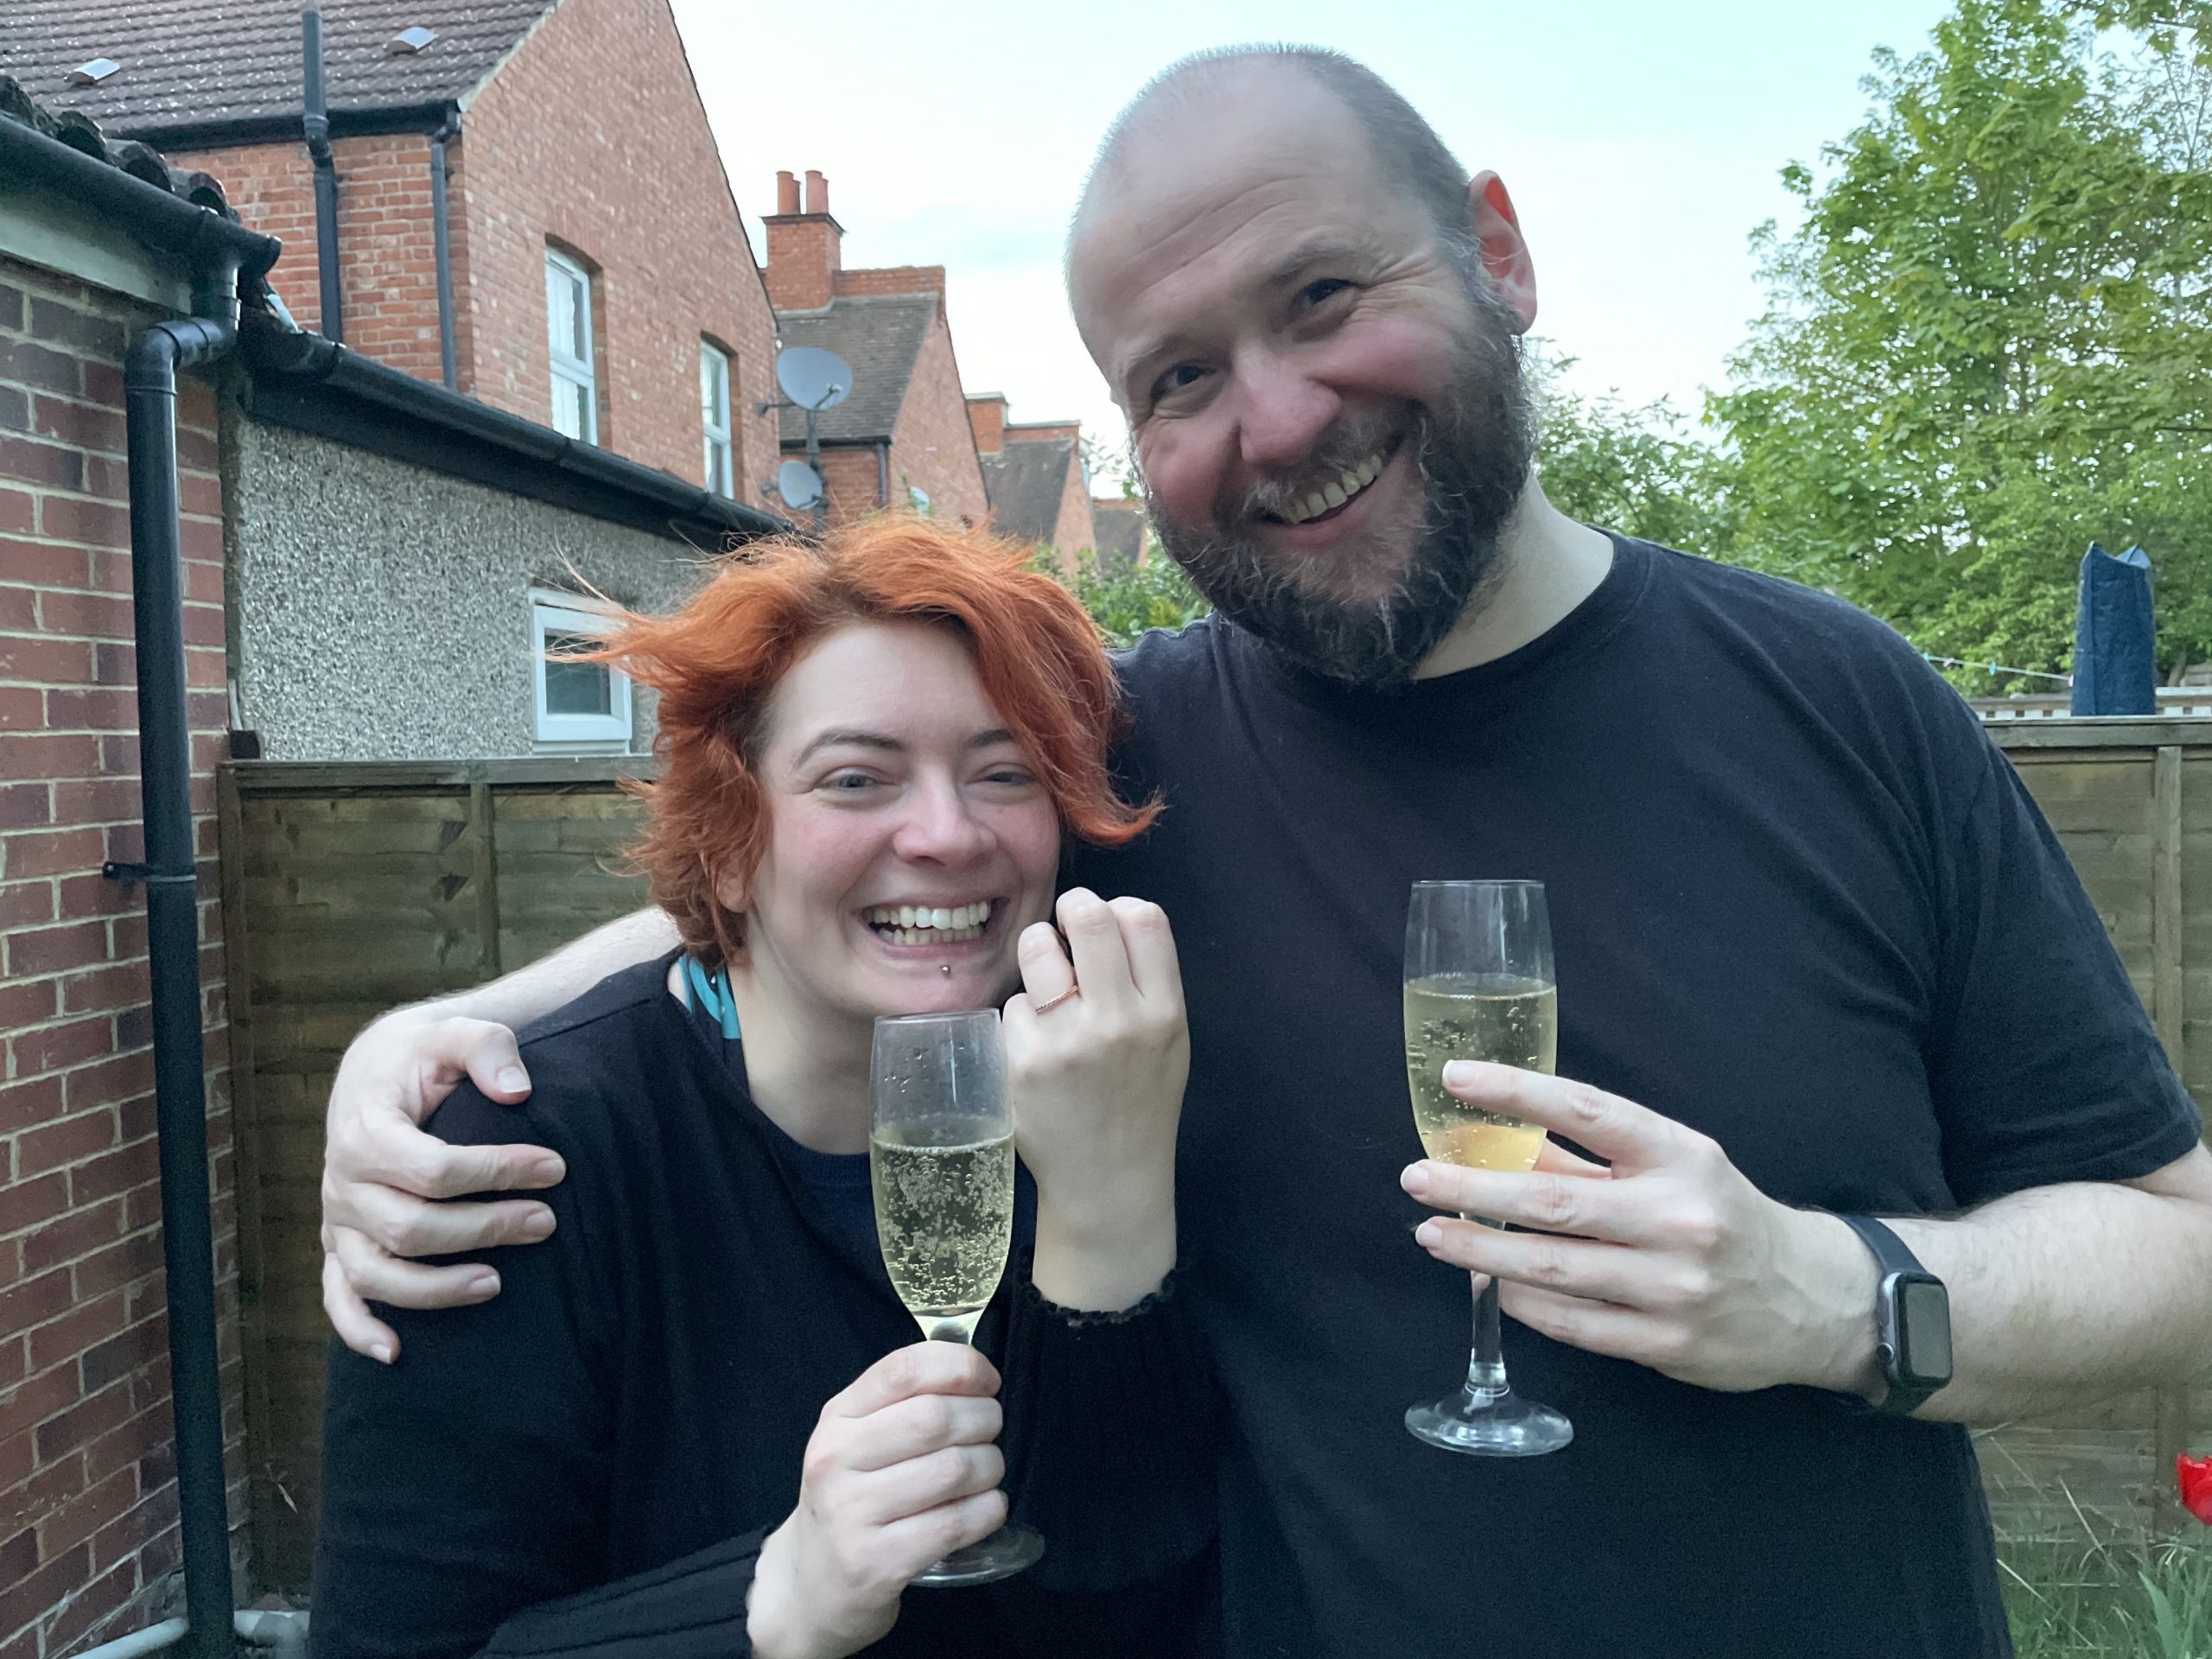 a photo of the two of us, holding champagne and showing off the engagement ring